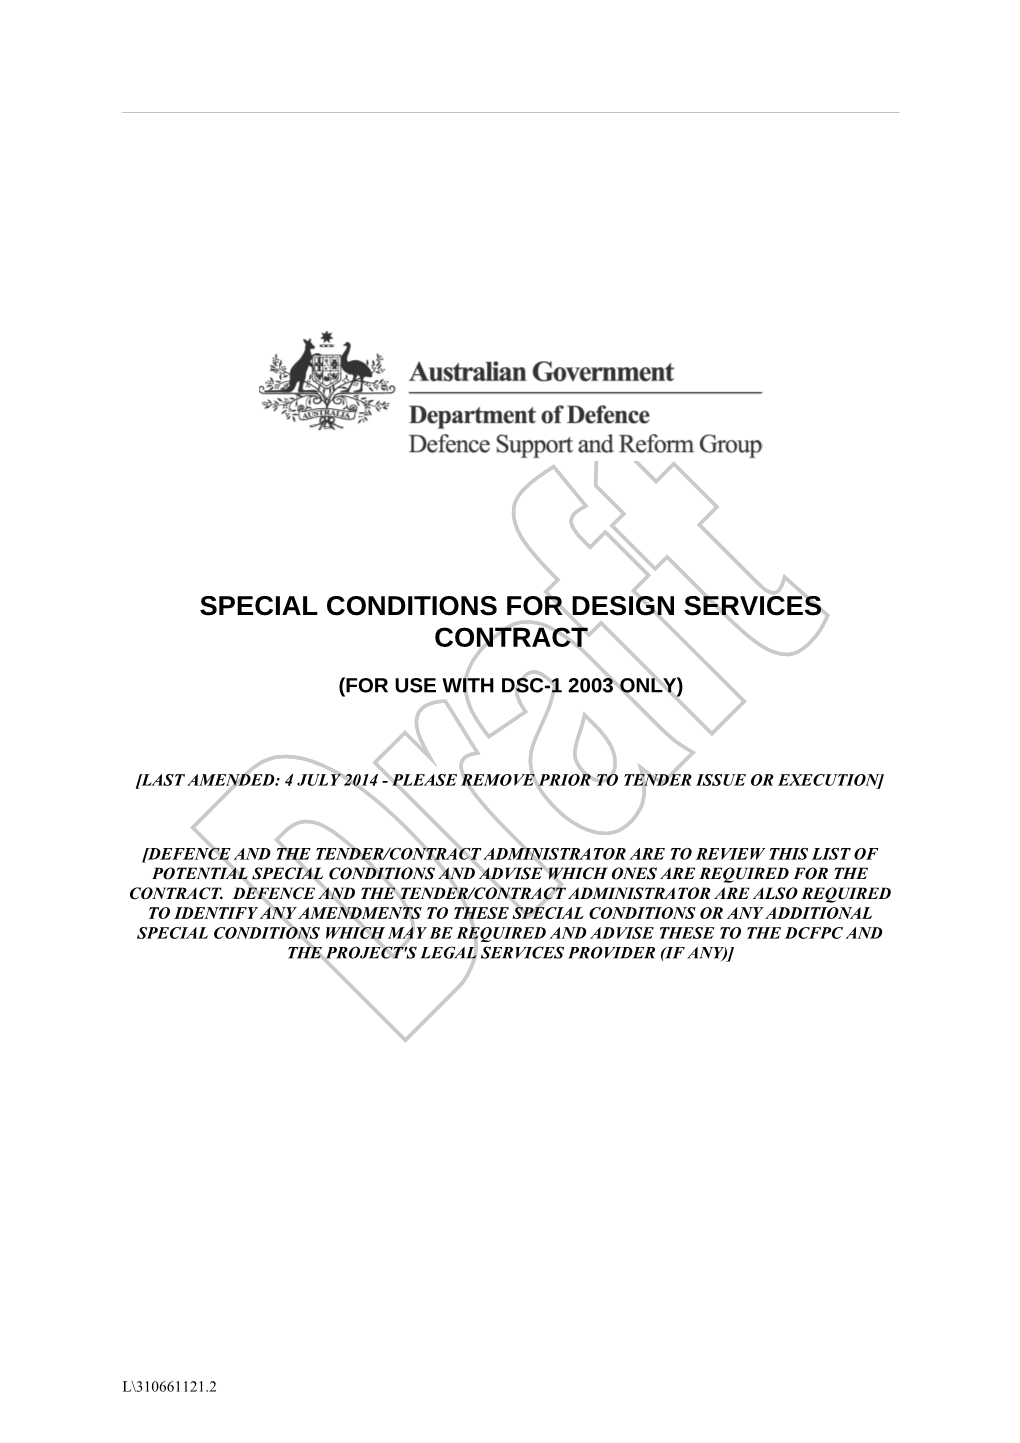 Special Conditions for Design Services Contract